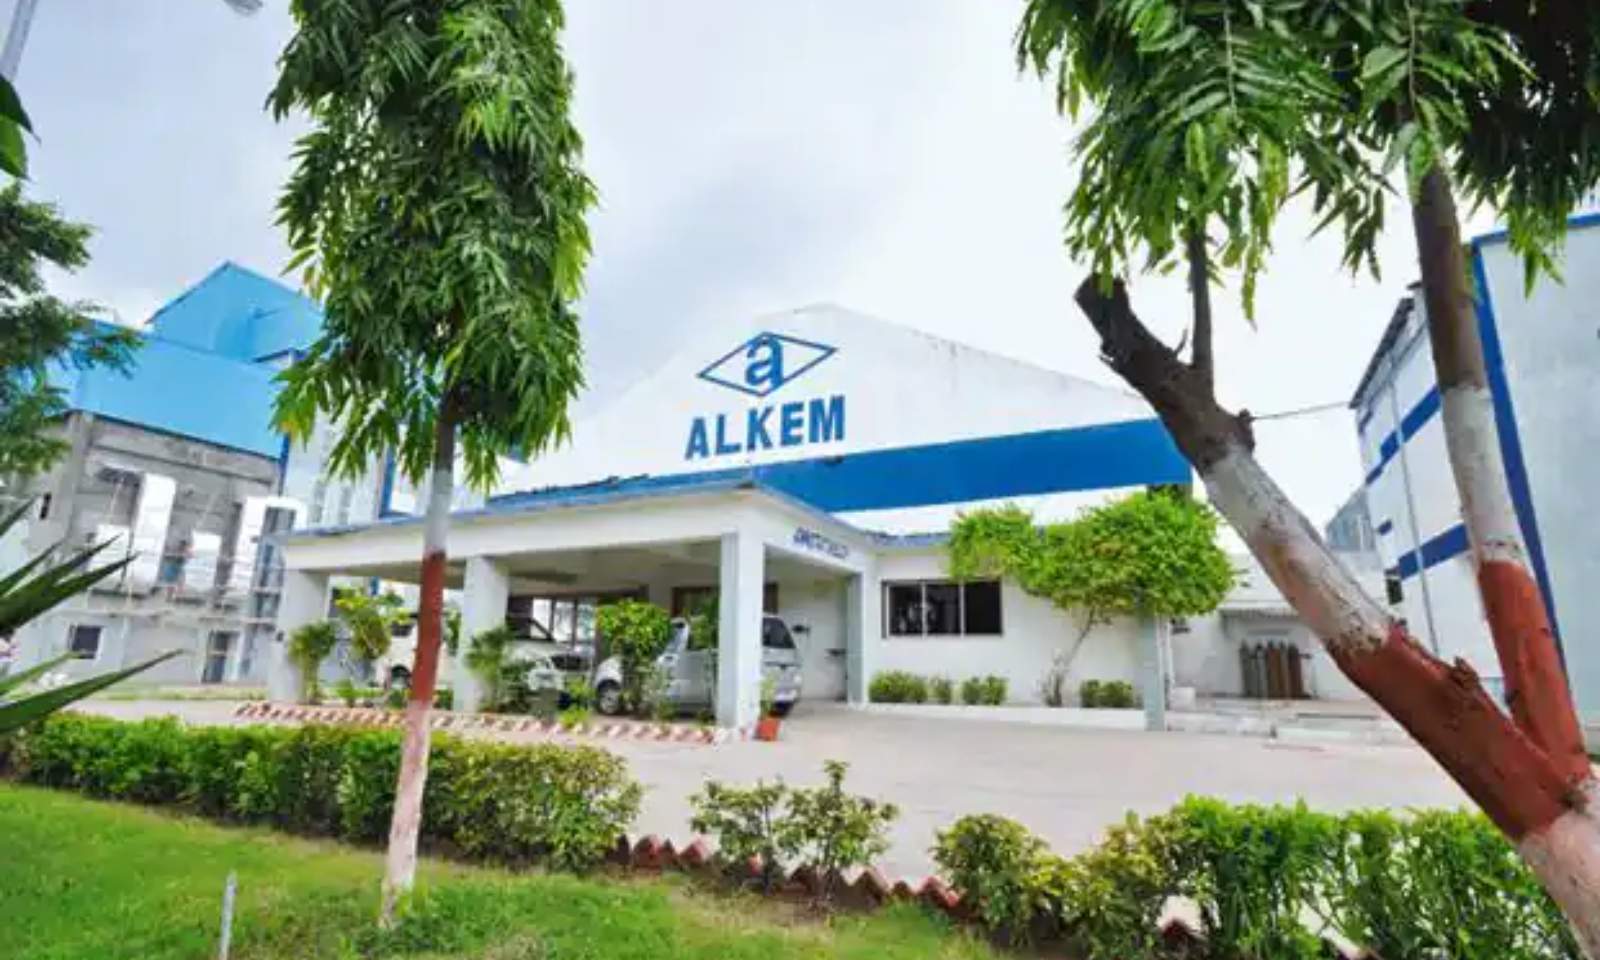 Pharma Giant Alkem Laboratories Faces Security Breach, Rs 52 Crores at Stake